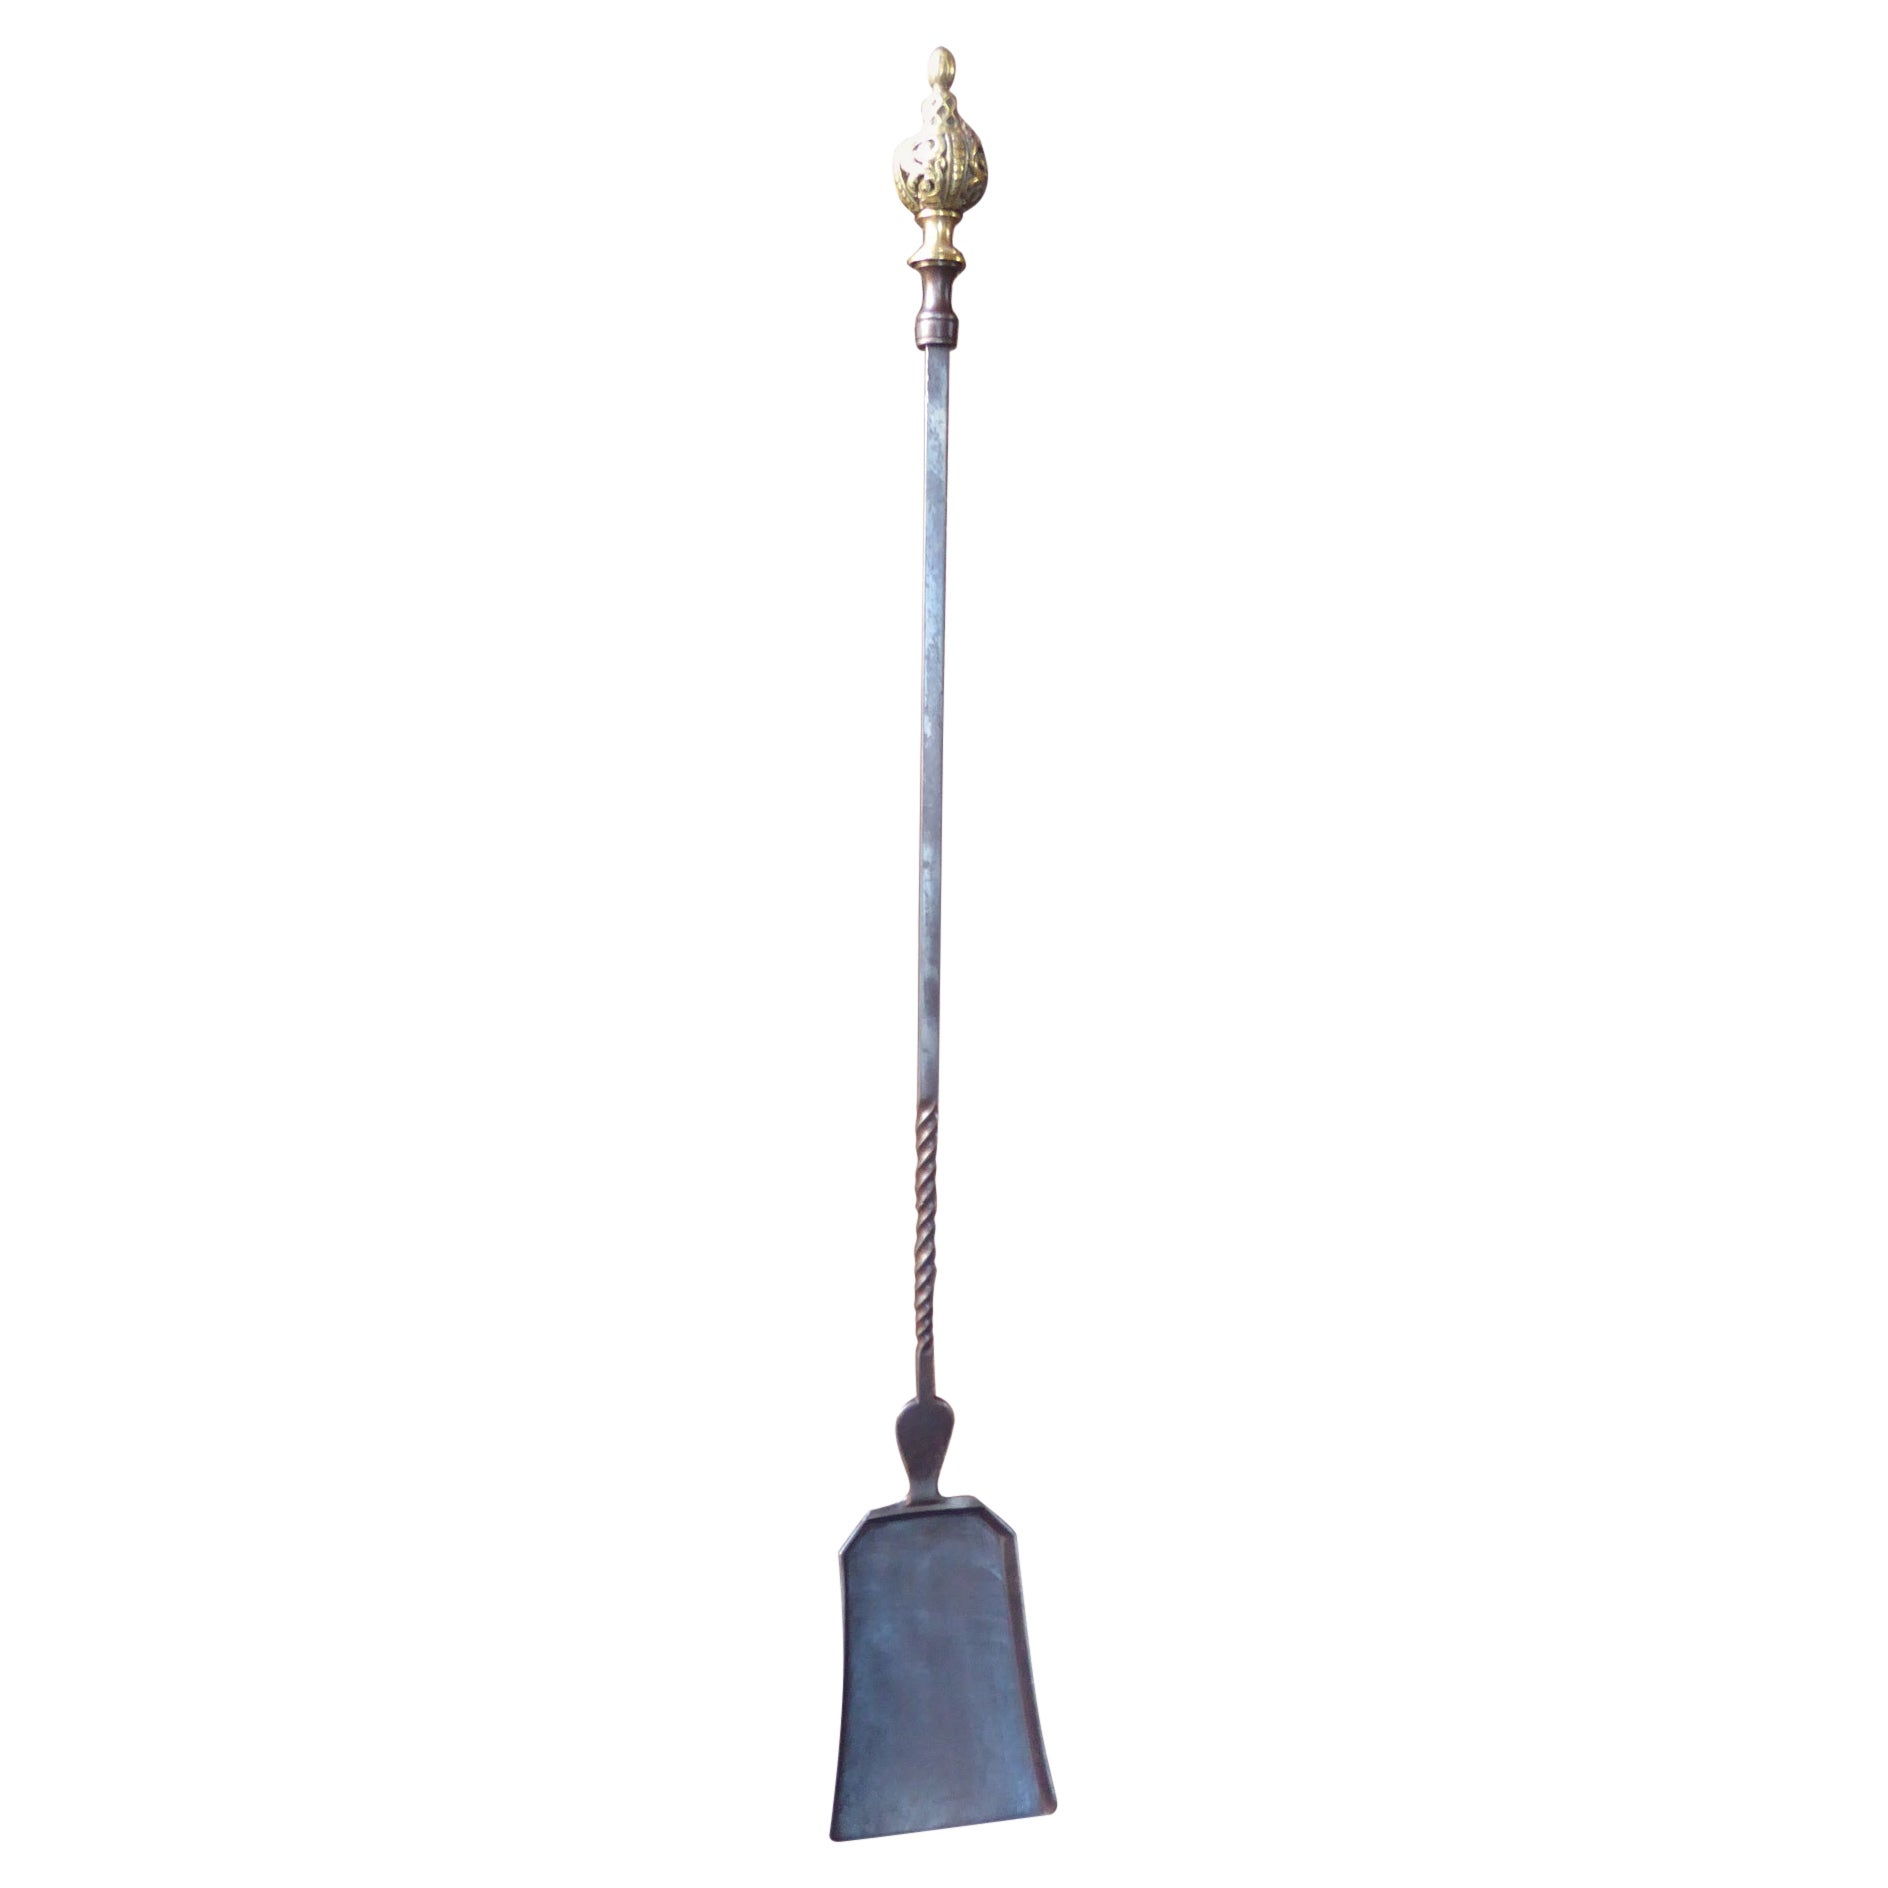 18th - 19th Century French Fireplace Shovel or Fire Shovel